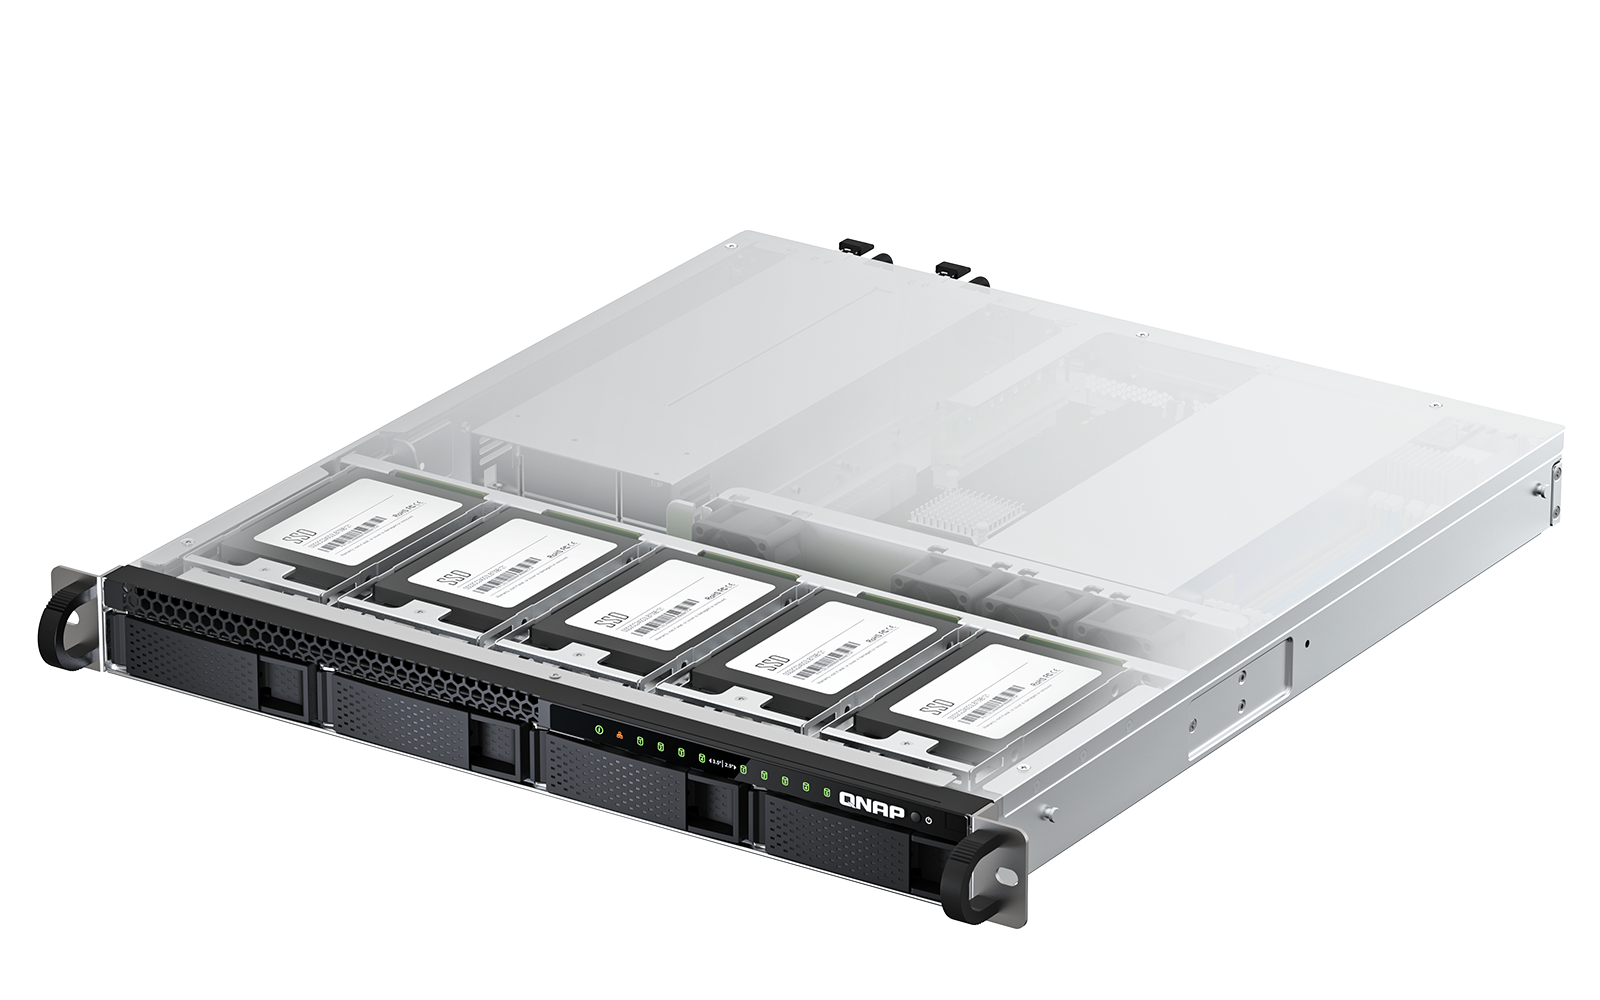 QNAP TS-h987XU-RP Powerful 10GbE-ready hybrid storage with PCIe Gen 4 expandability supporting QuTS hero or QTS operating system